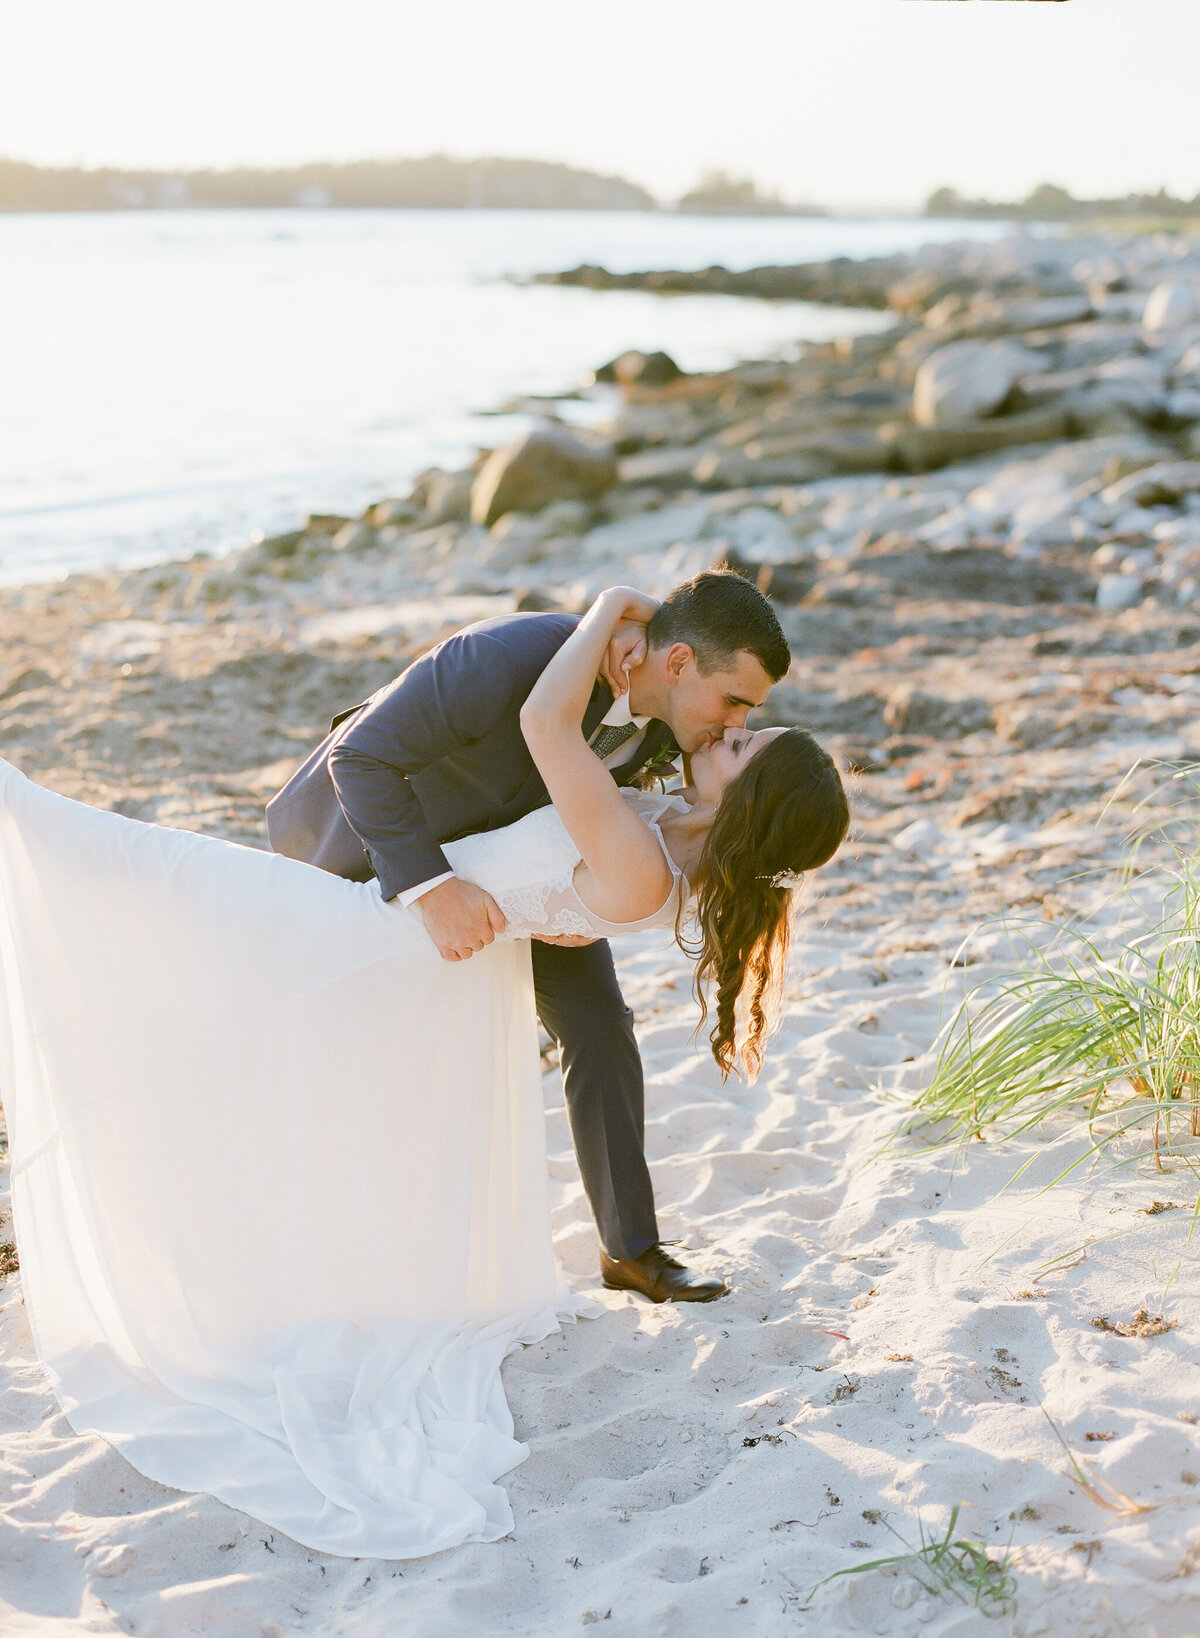 Jacqueline Anne Photography - Halifax Wedding Photographer - Jaclyn and Morgan-91